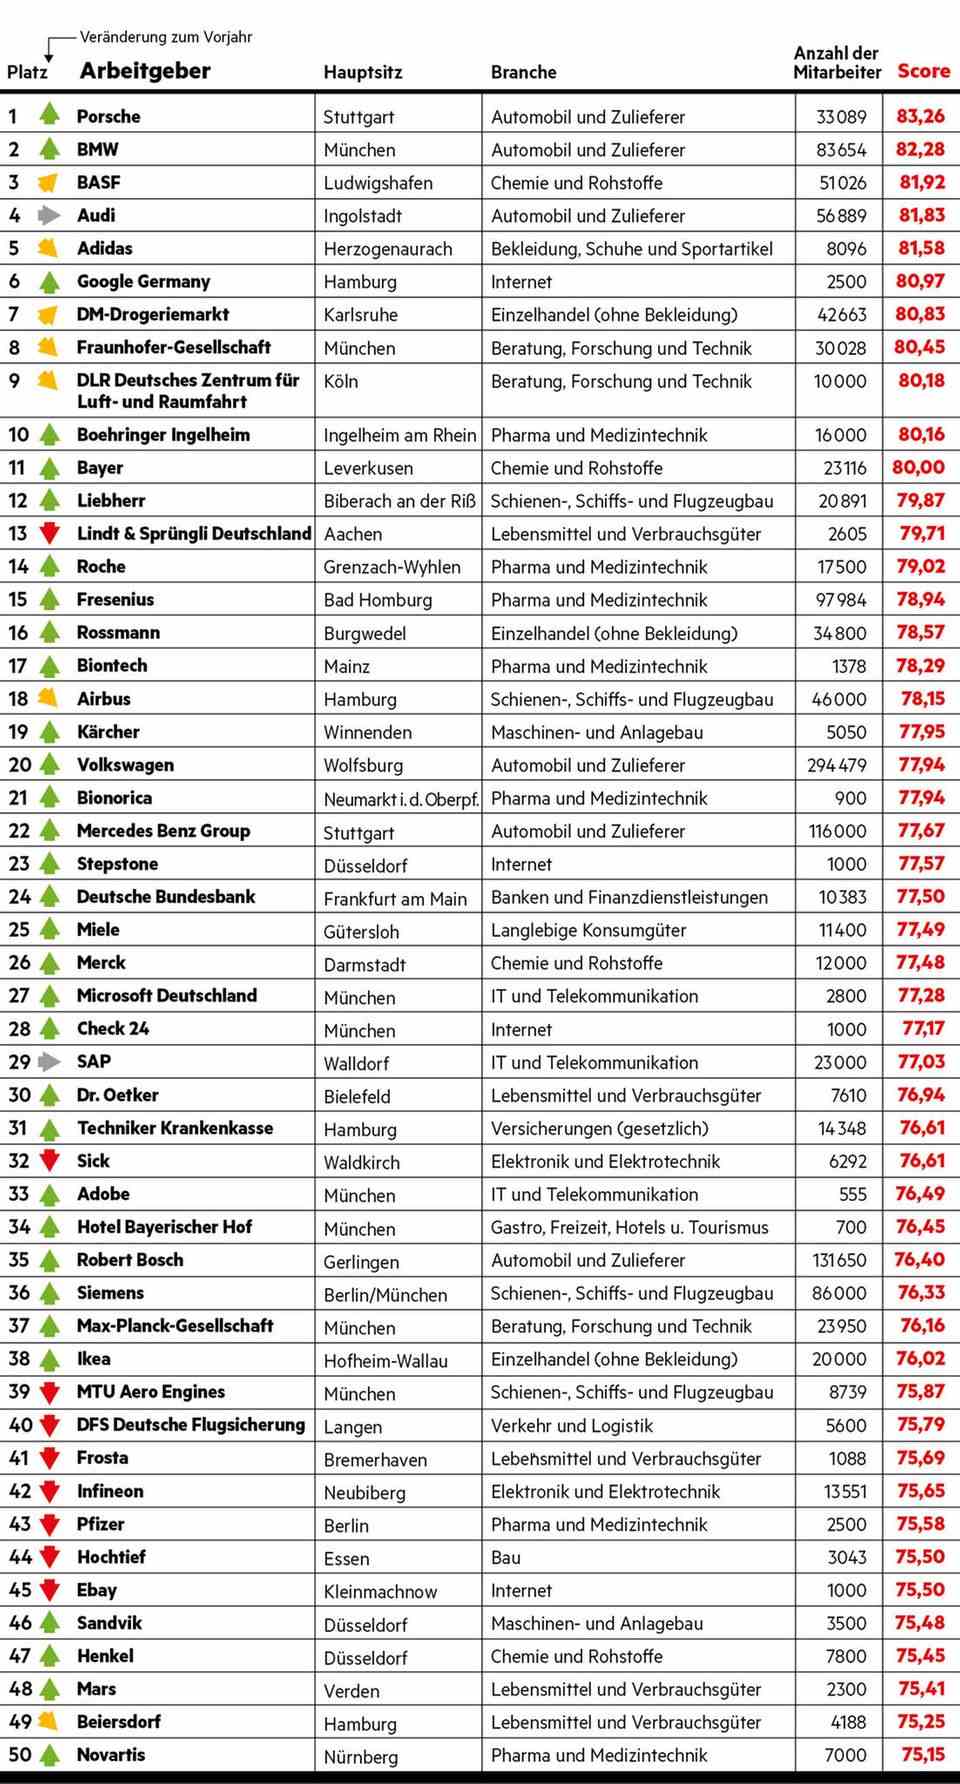 List of the top 50 employers